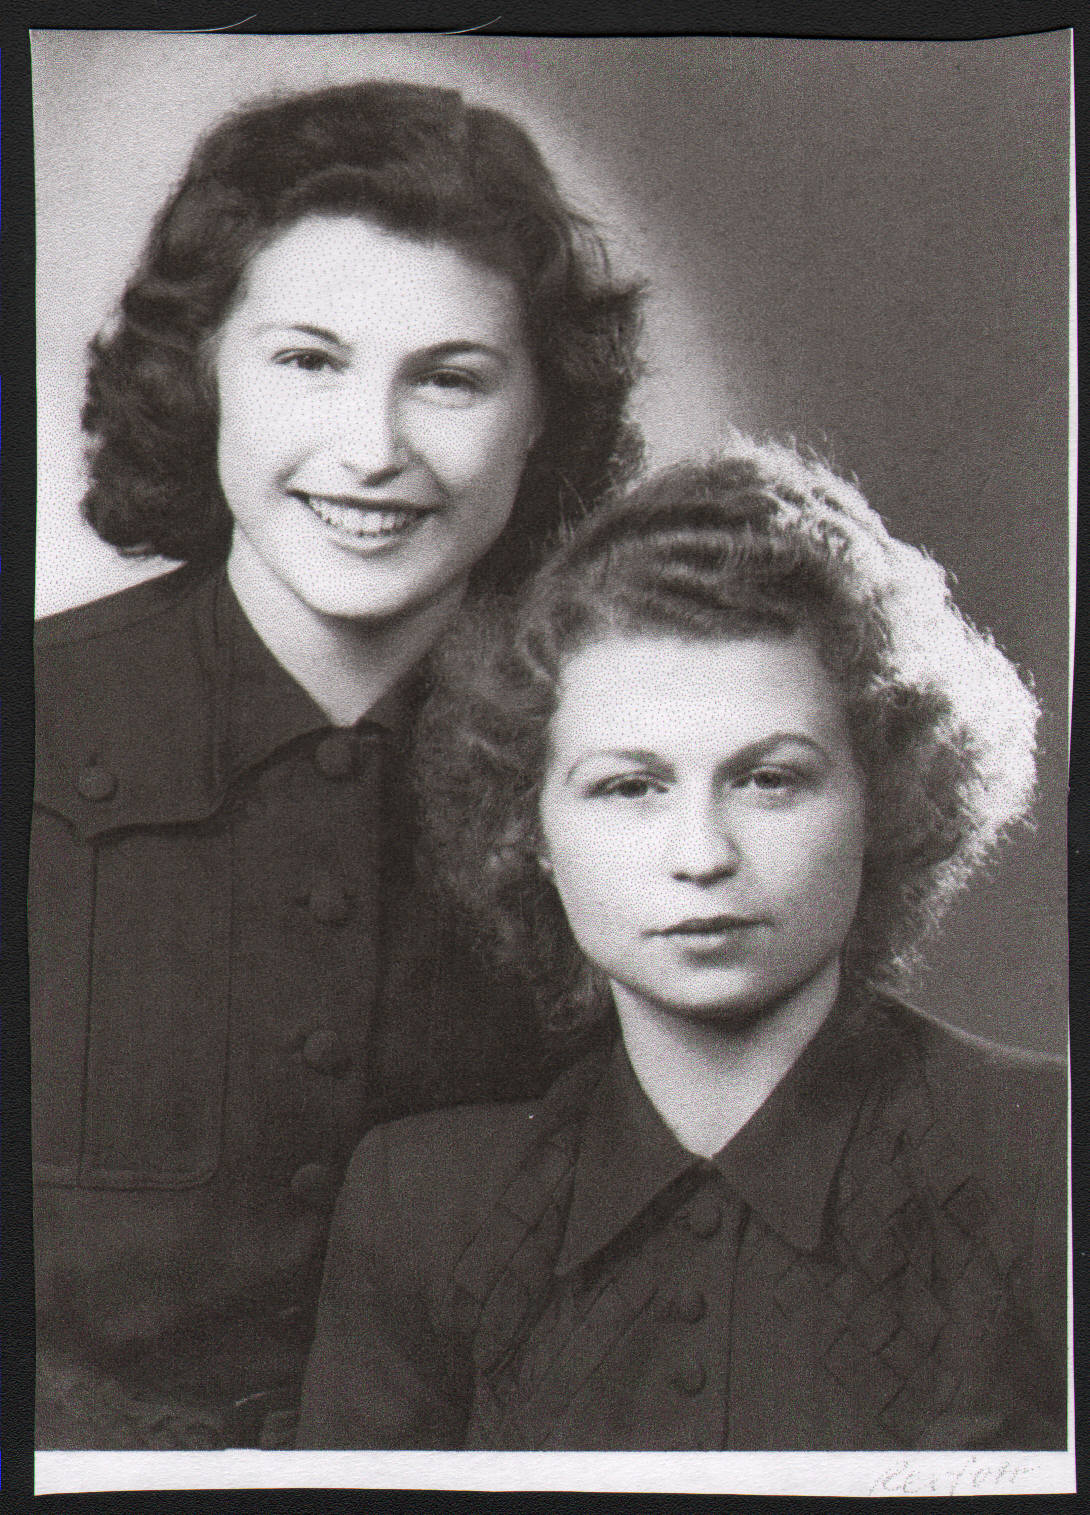 Ruth and her sister in the 1940s